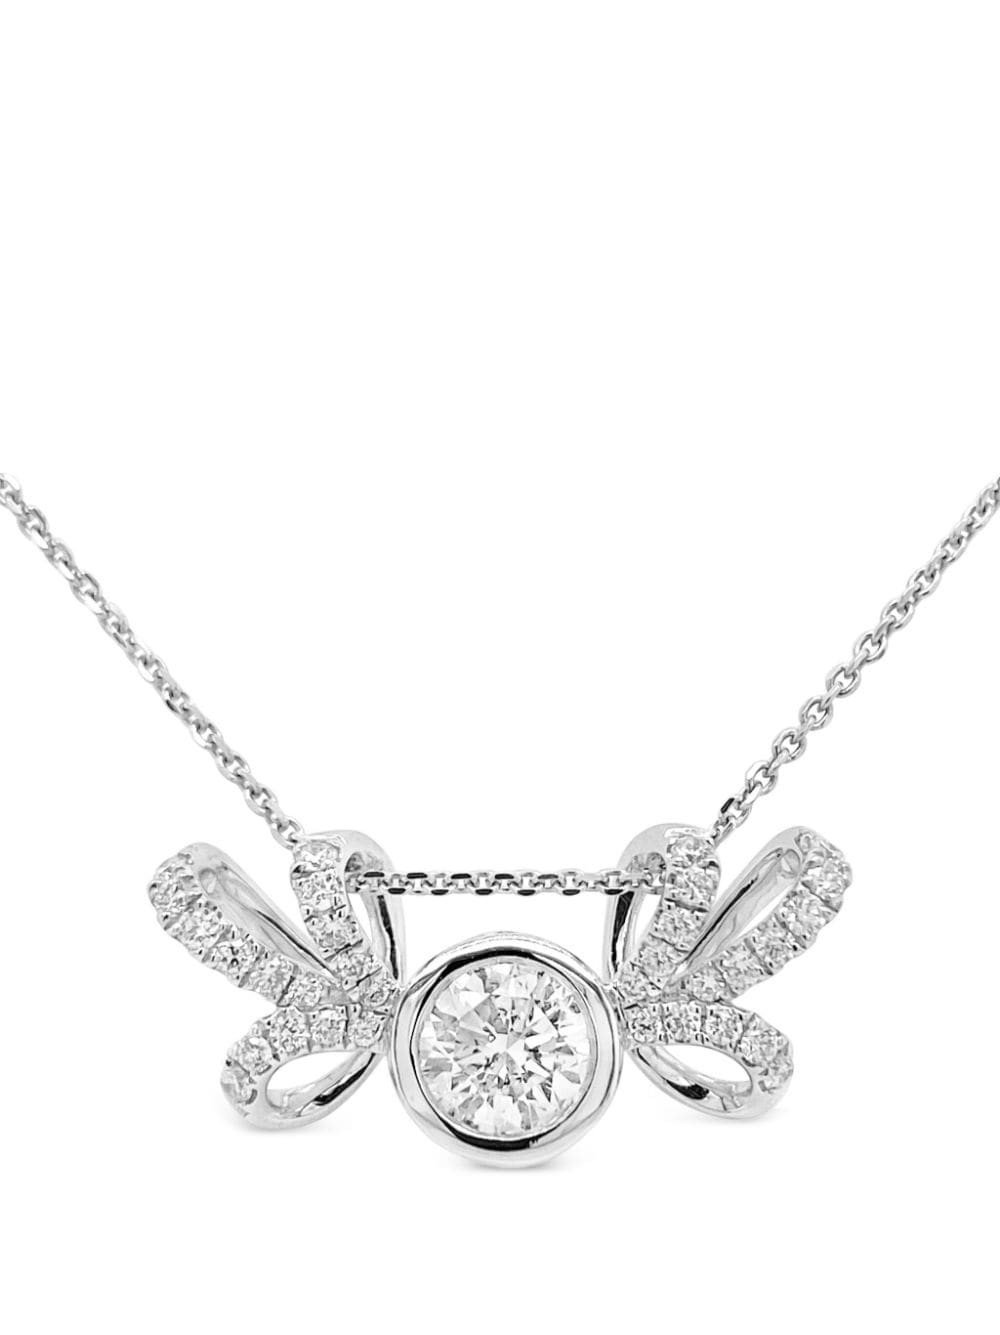 Hyt Jewelry 18kt White Gold Diamond Pendant Necklace In Silver